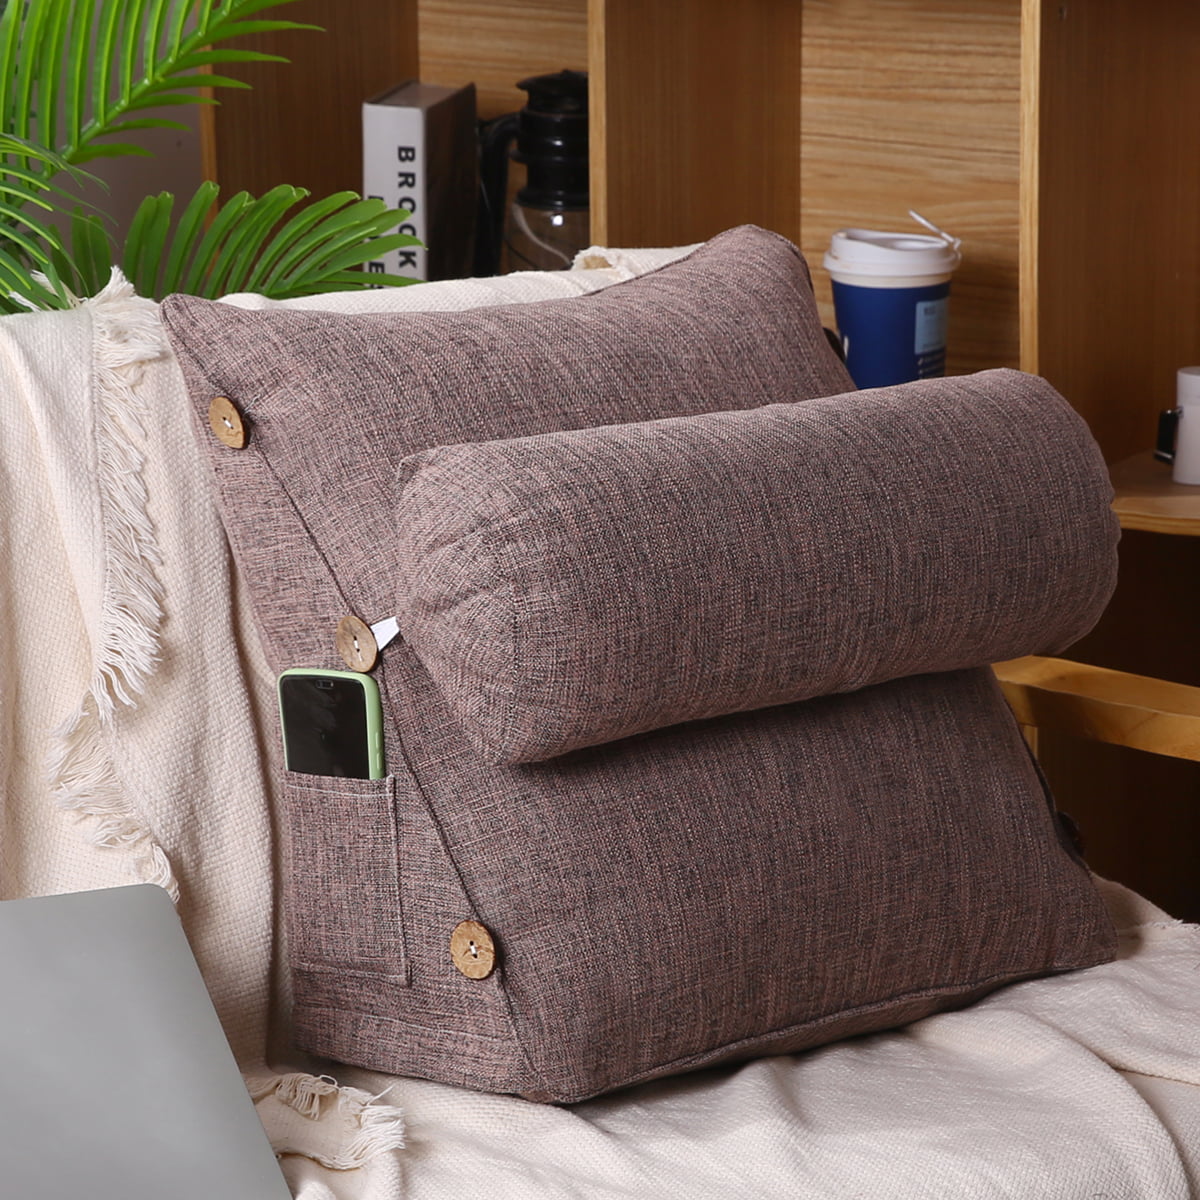 Adjustable Backrest Wedge Pillow Reading & Bed Rest Pillow, Perfect Back Support Cushion for